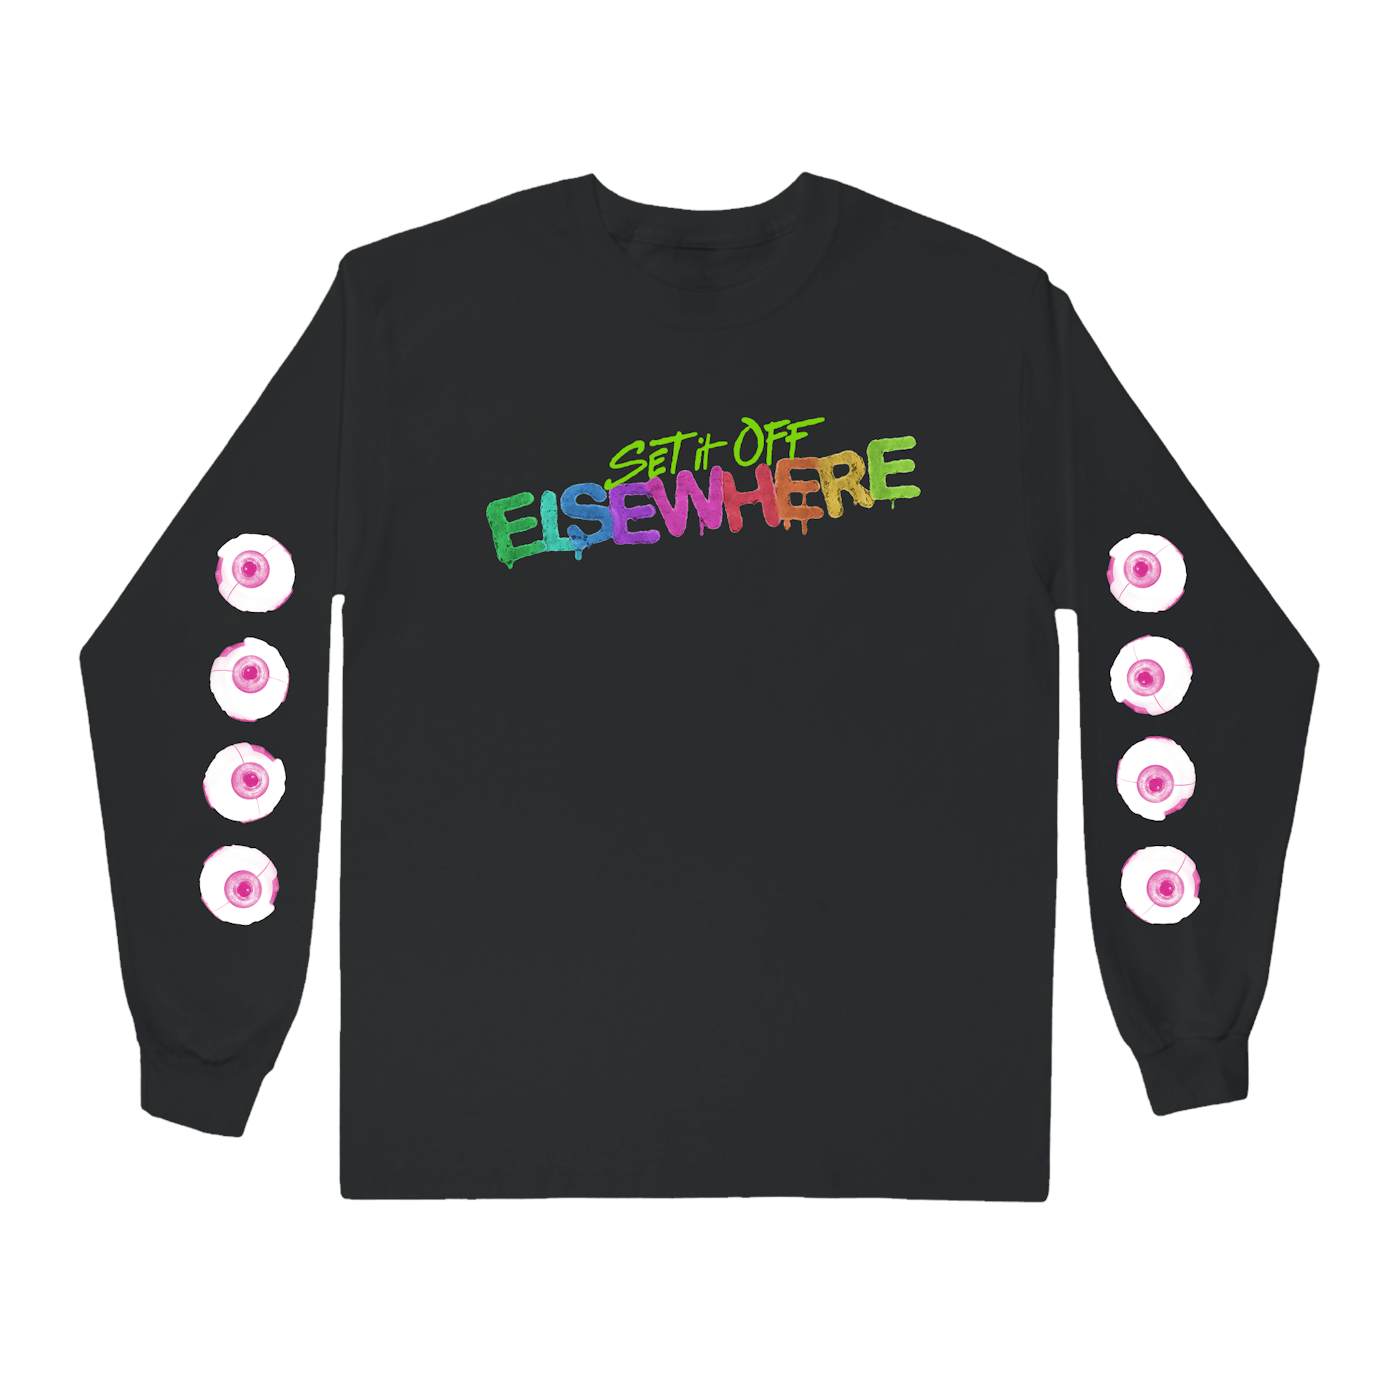 Set It Off - Elsewhere merch is available now 🐇 Pick it